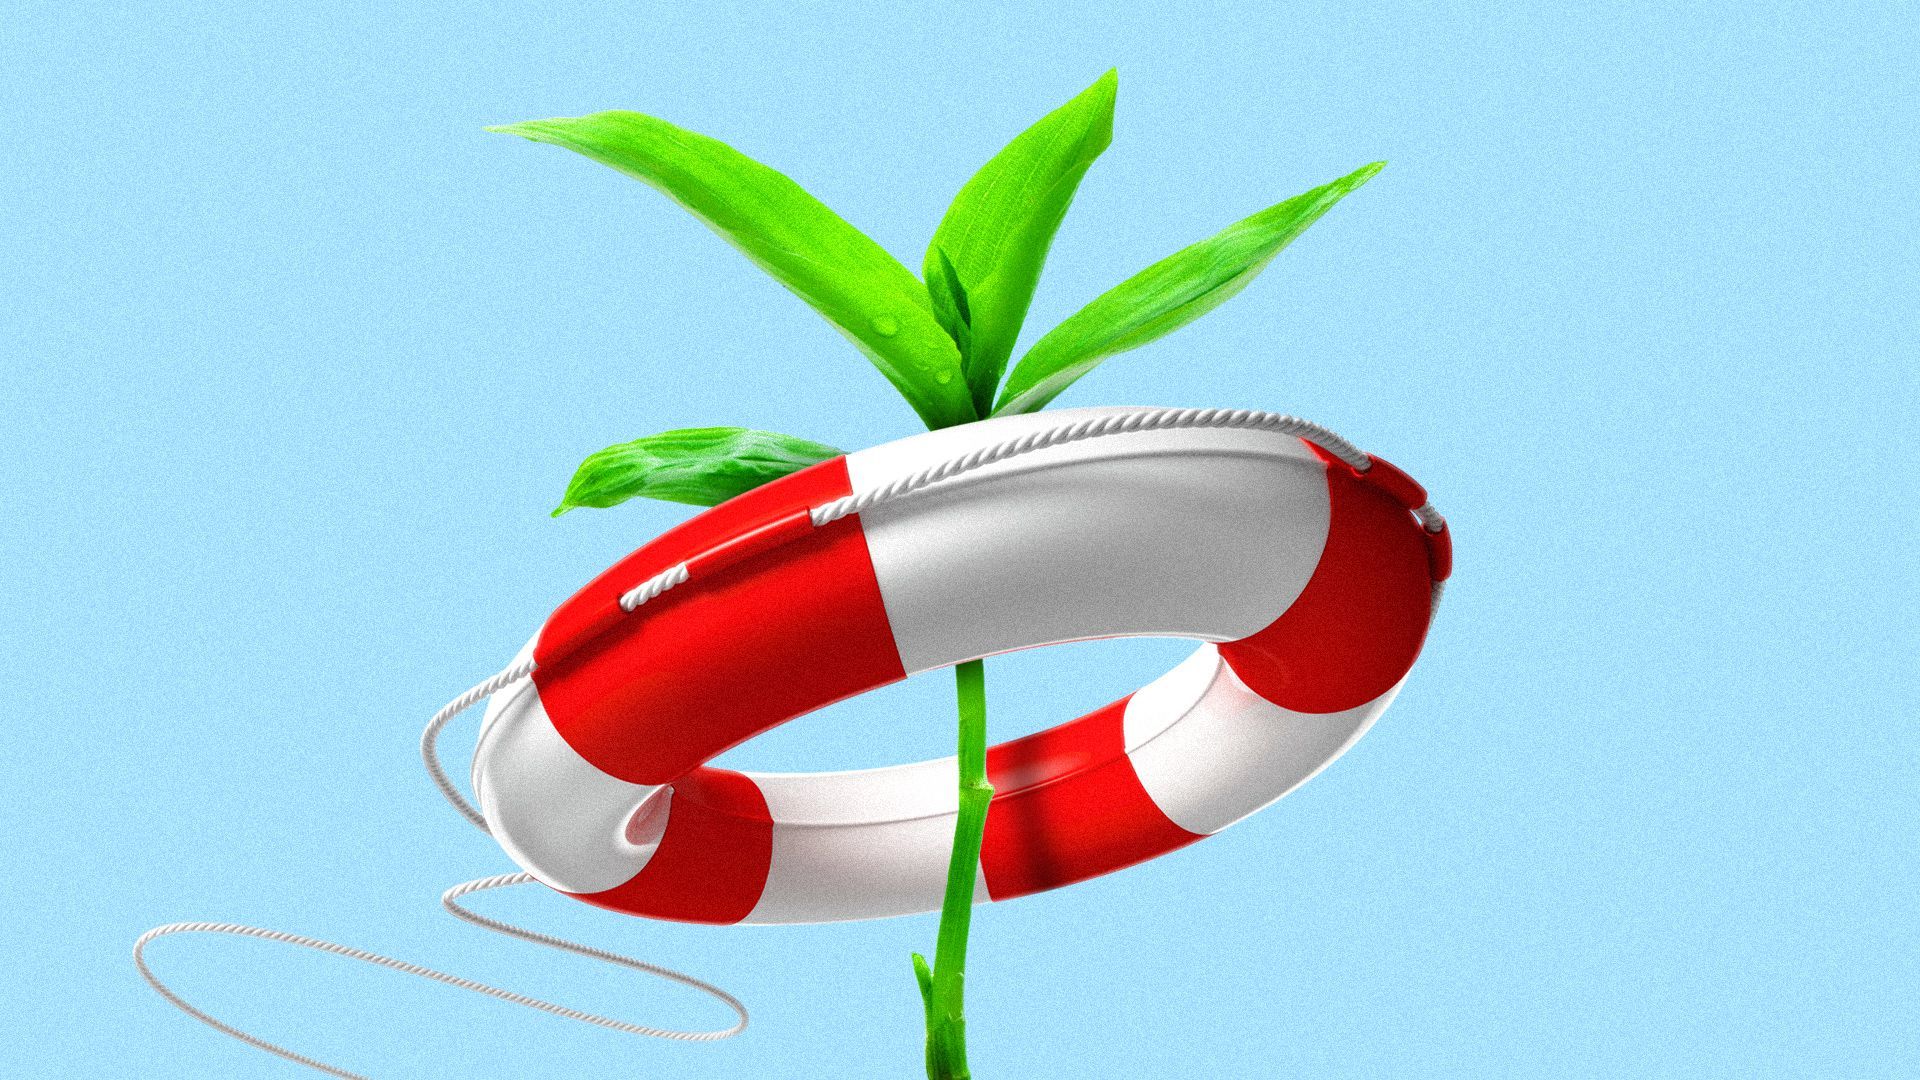 Illustration of a sprout with a life preserver thrown over it.